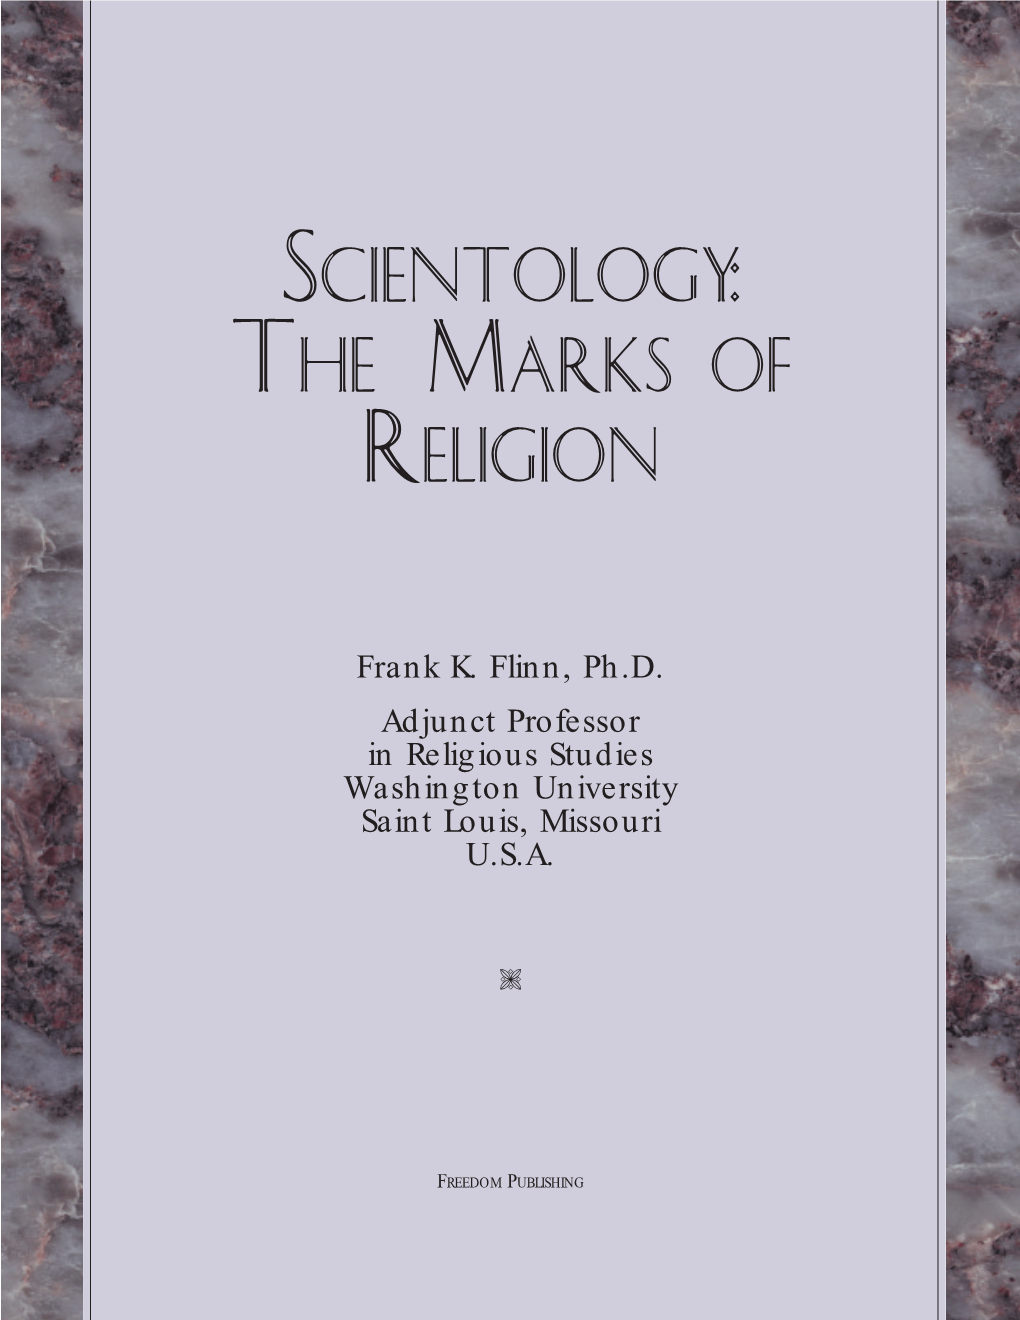 Scientology: the Marks of Religion